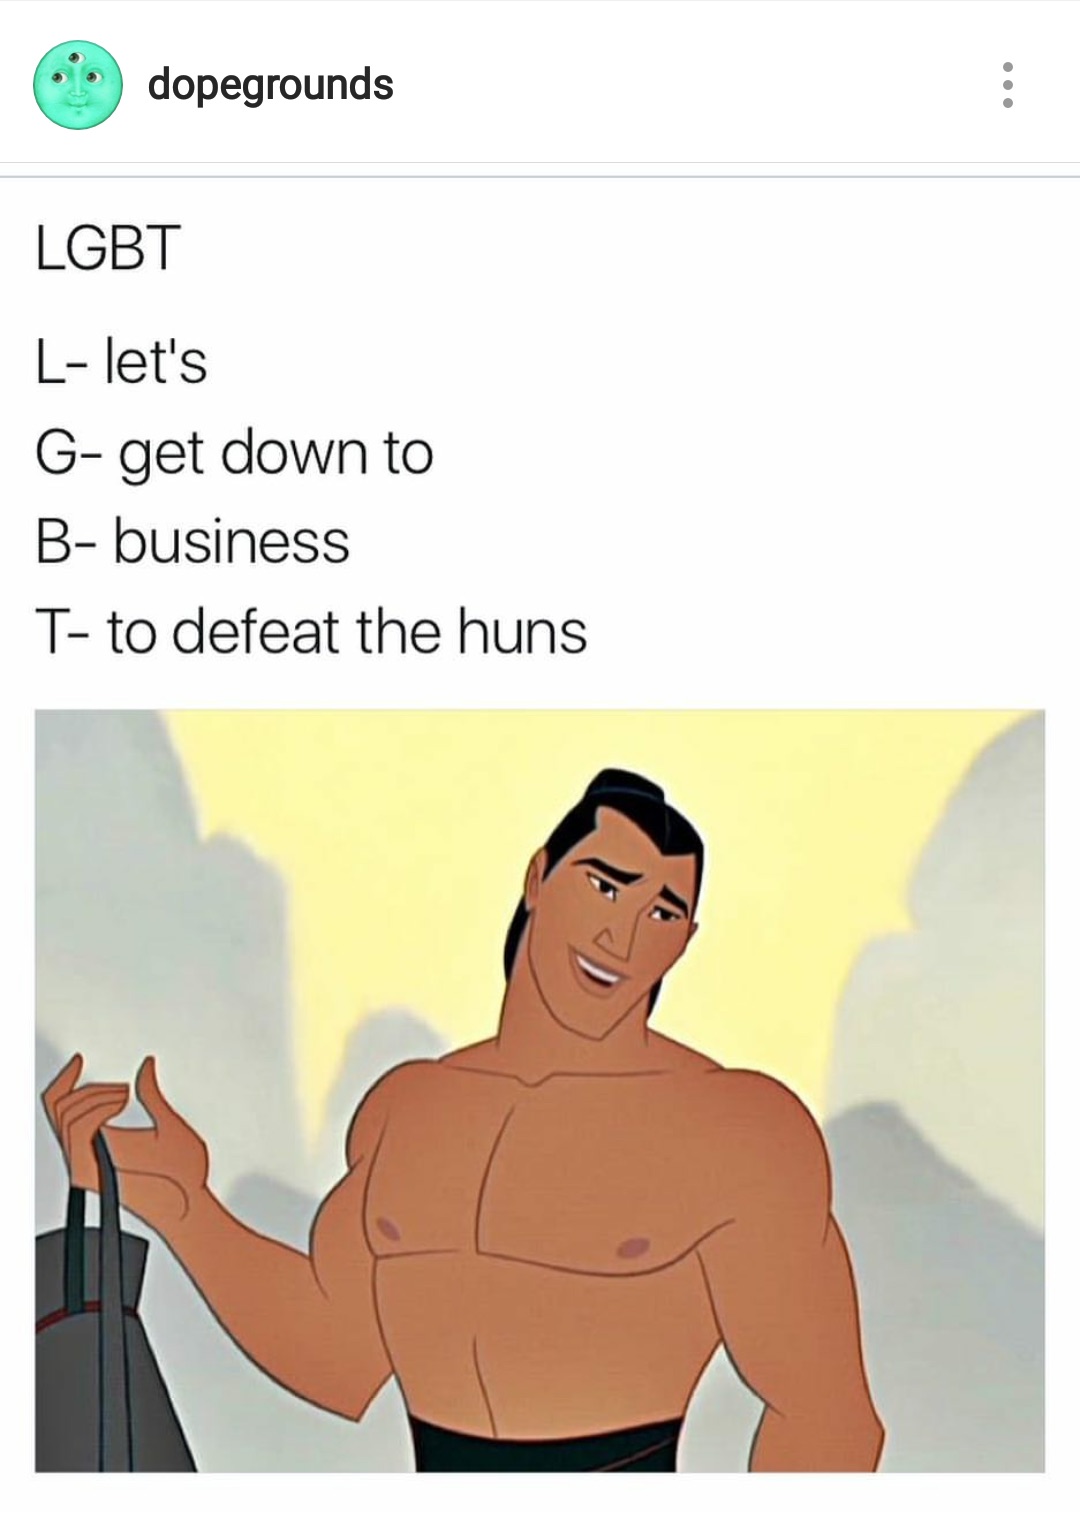 Funny Huns meme about LGBT meaning